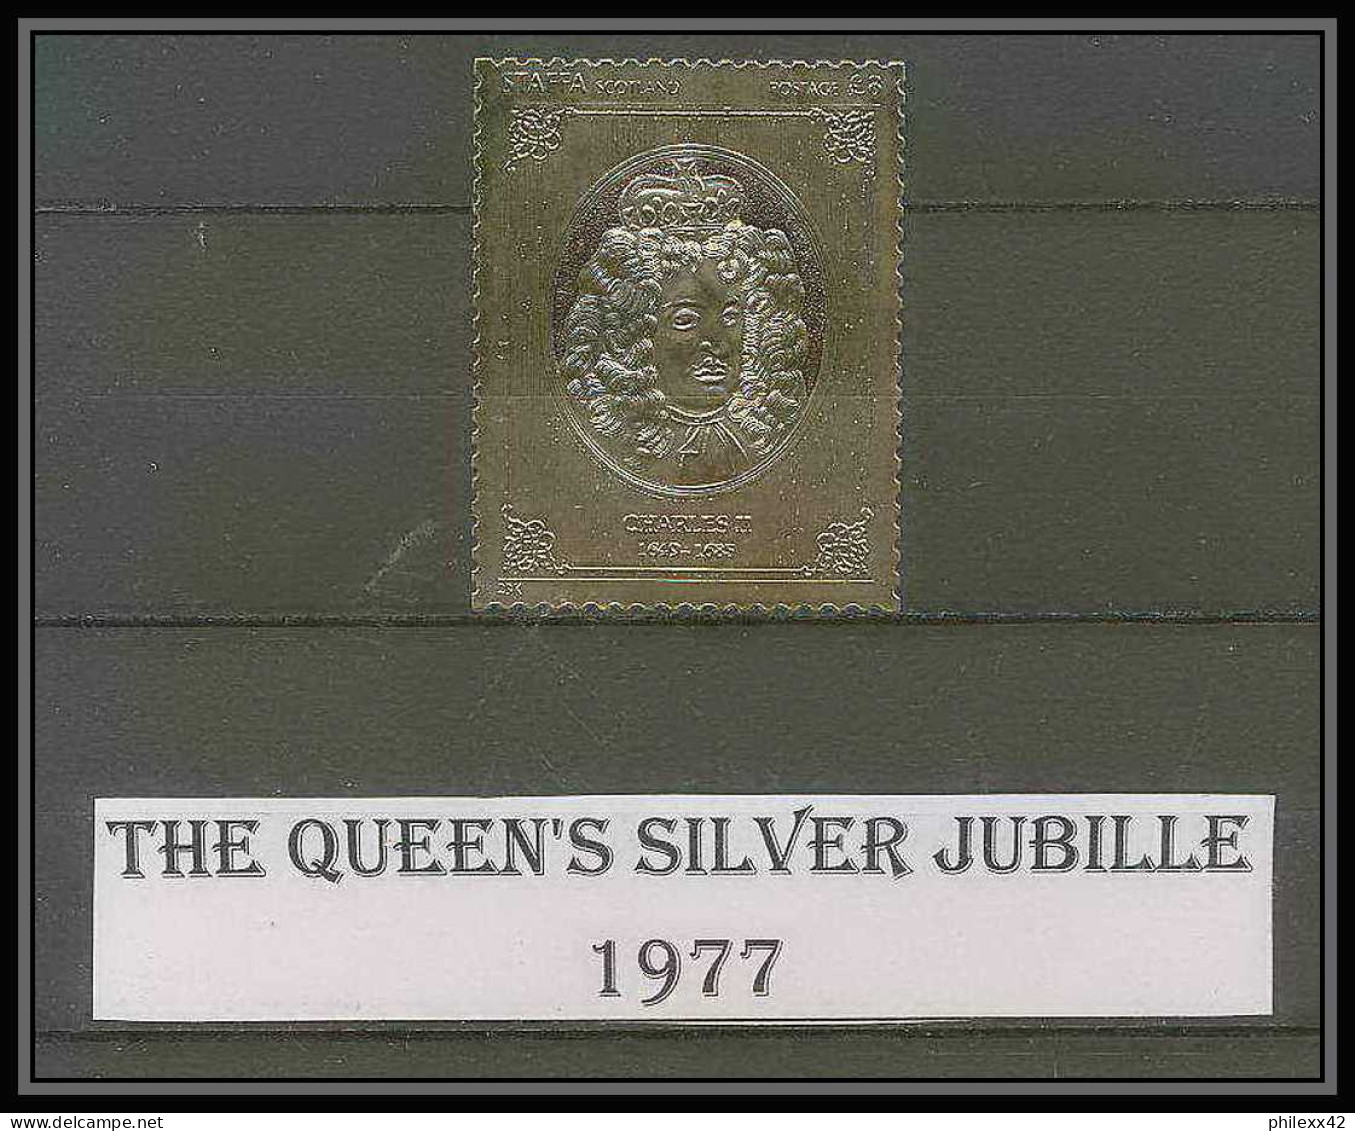 461 Staffa Scotland The Queen's Silver Jubilee 1977 OR Gold Stamps Monarchy United Kingdom Charles 2 Type 1 Neuf** Mnh - Local Issues